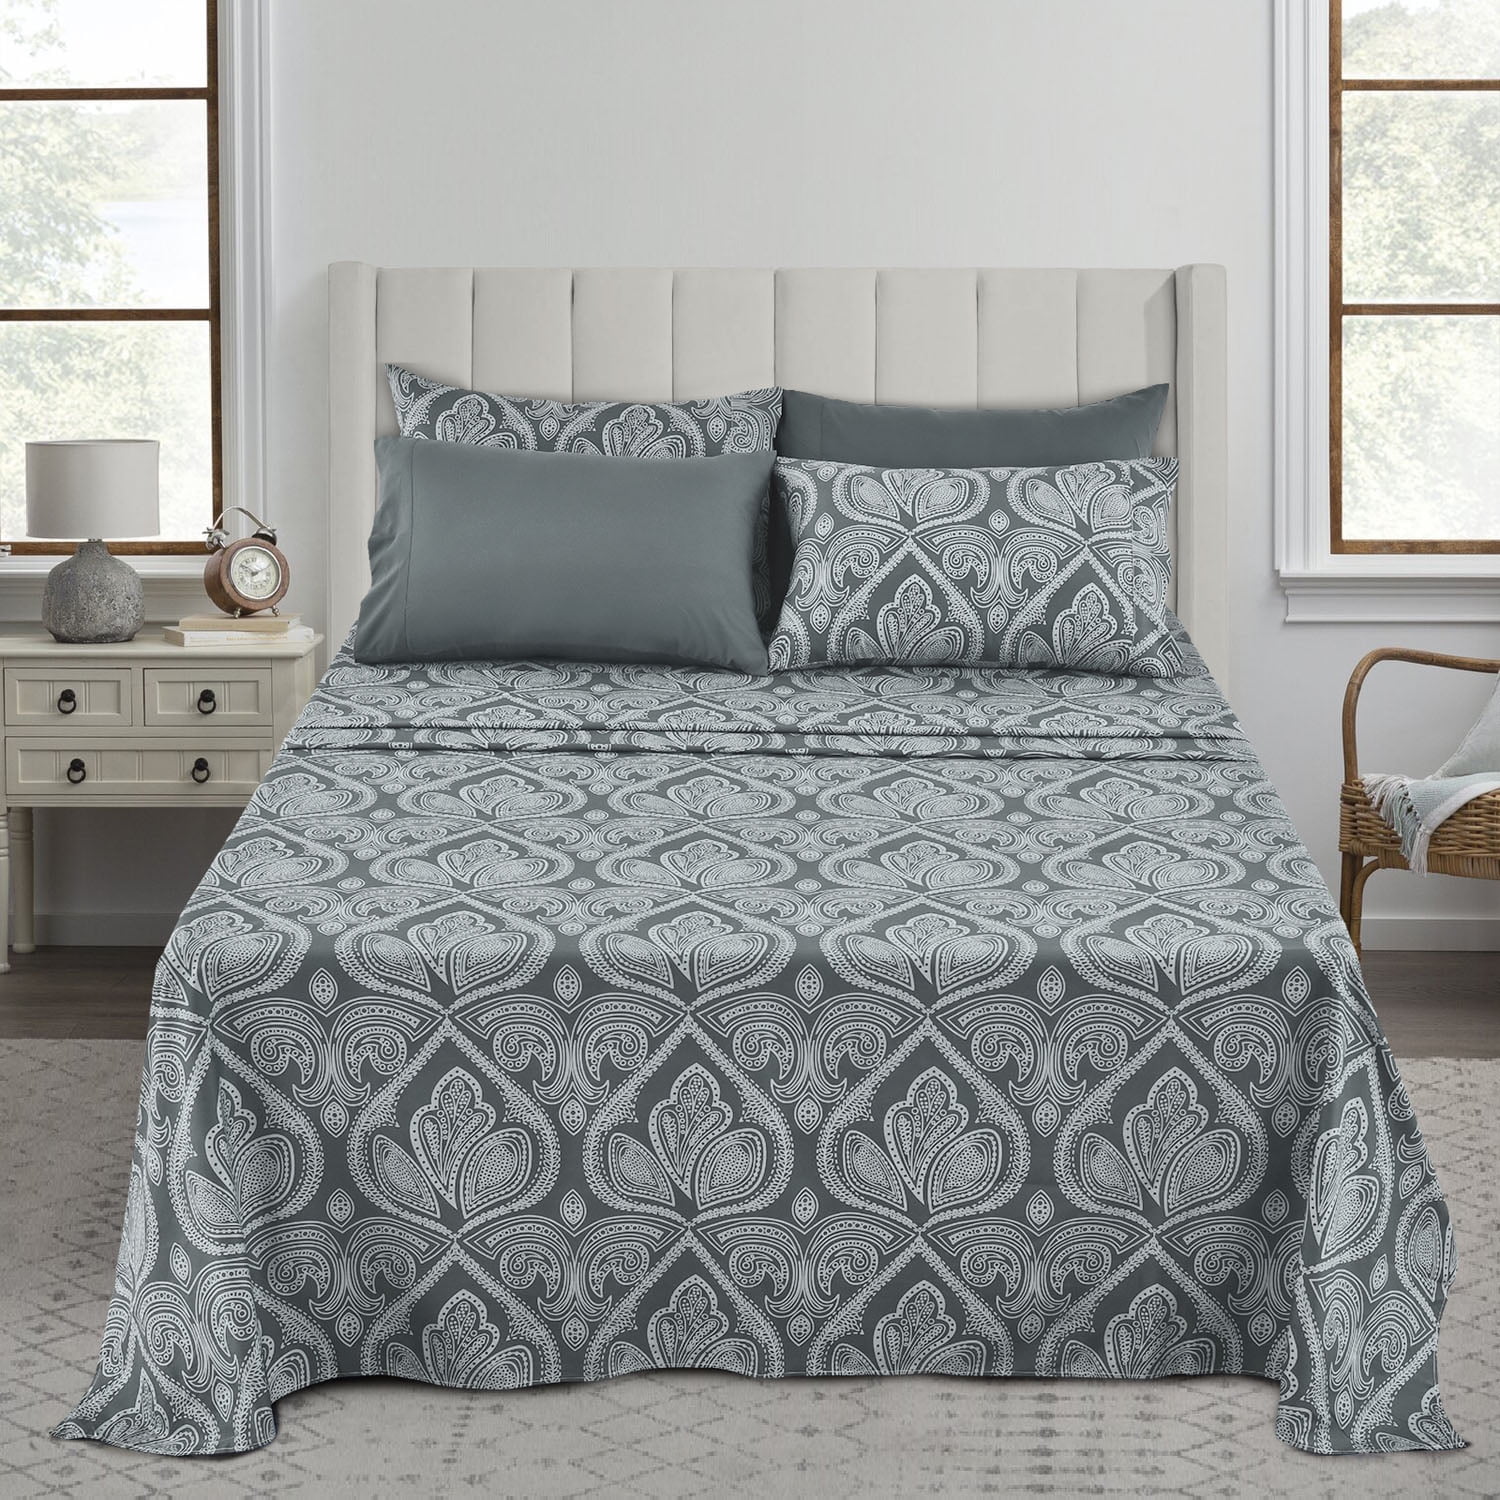 Details about   Extra Deep Wall Comfy Bedding Item 1200 Thread Count Choose Item Grey Solid 